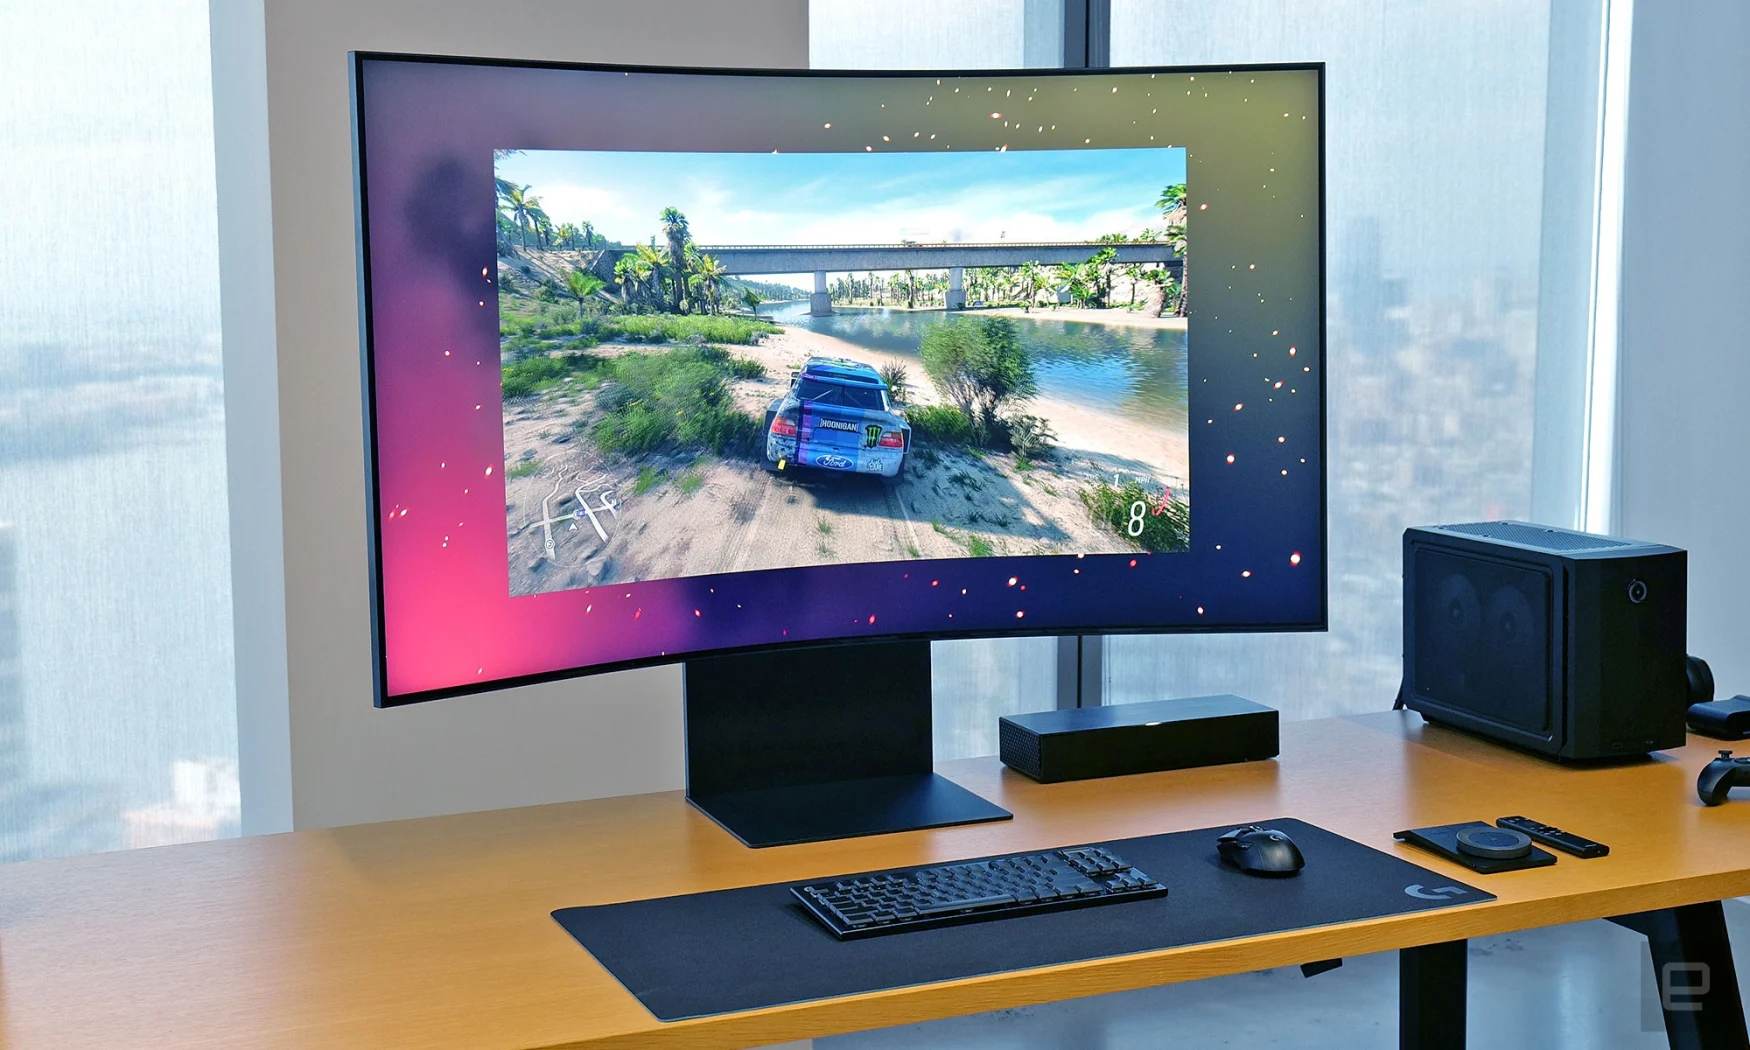 With a massive 55-inch 4K screen, Samsung's Odyssey Ark is one of the largest gaming monitors on the market. 